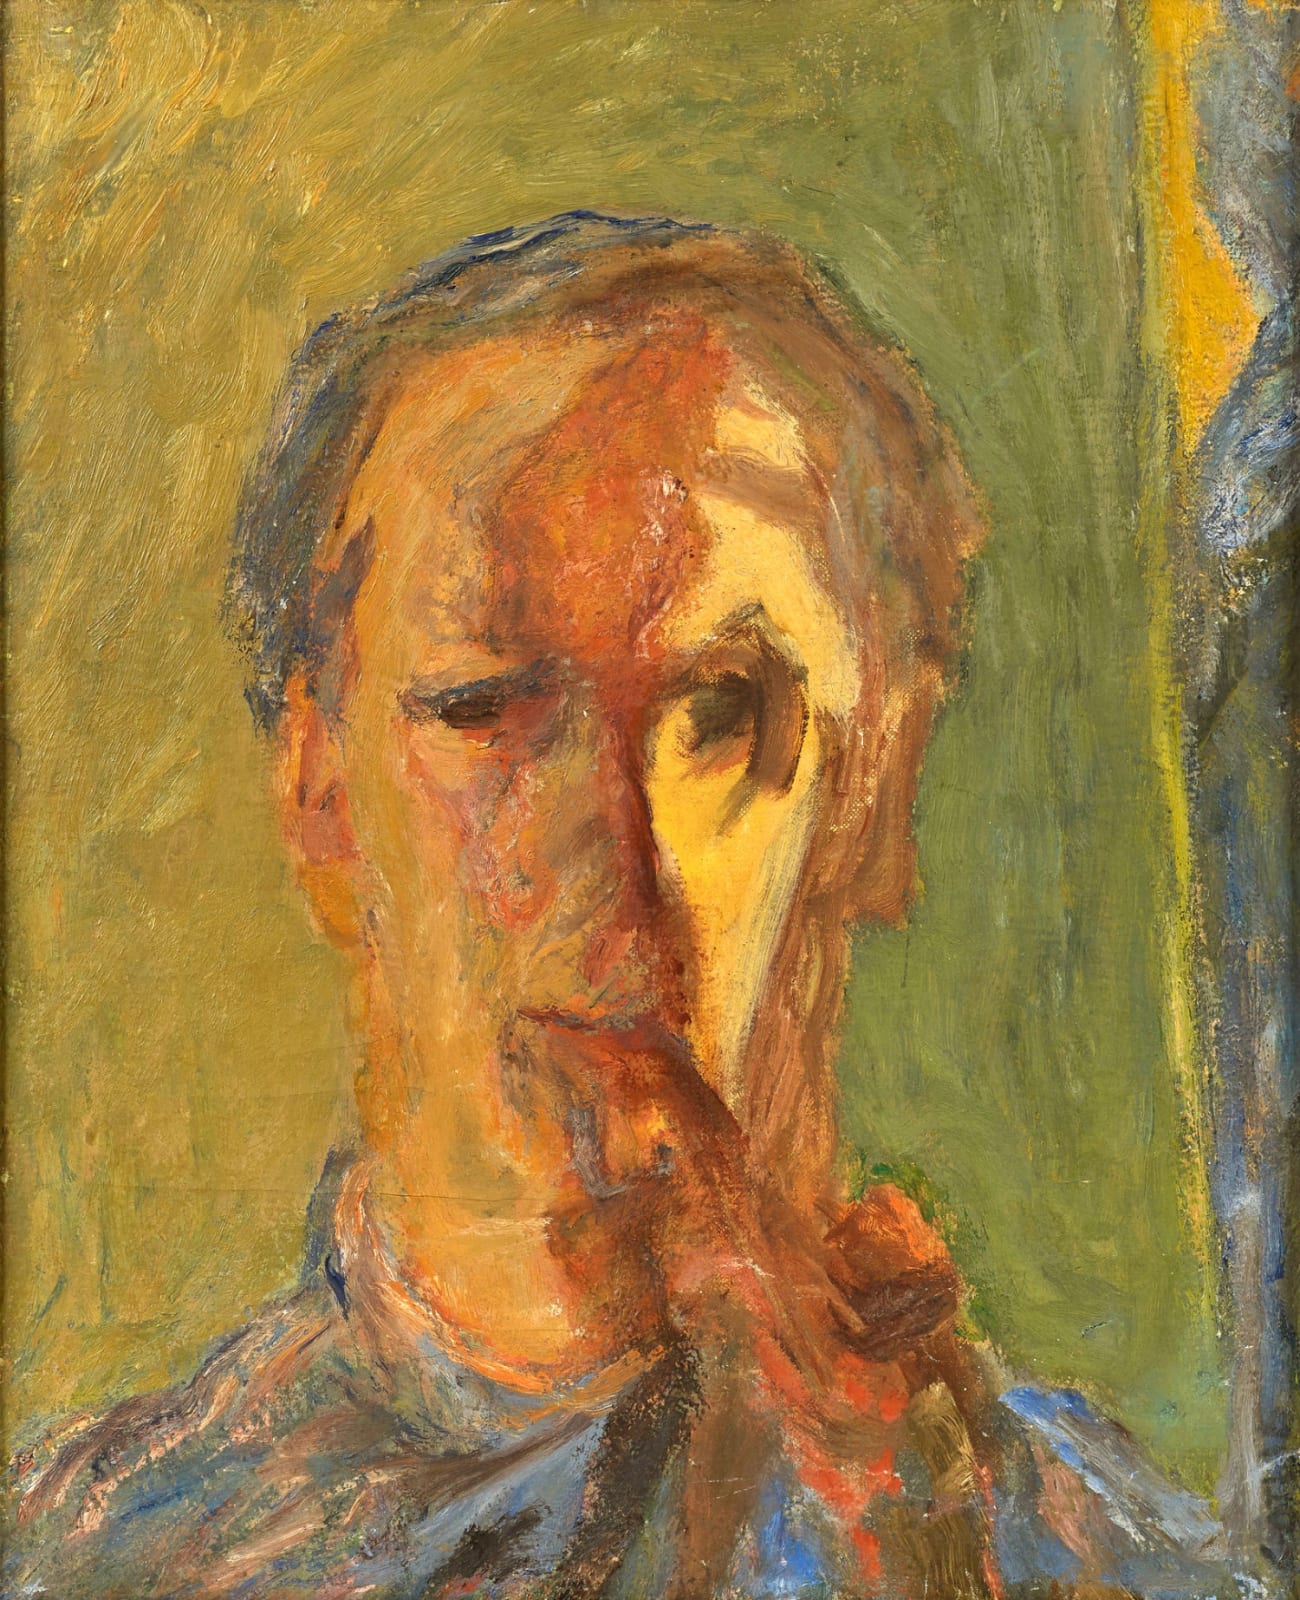 Henryk Gotlib (1890-1966) Self Portrait with Pipe 1950-52 Oil on canvas 57.7 x 48.8 cm Ben Uri Collection © Anne Dockery To see and discover more about this artist click here